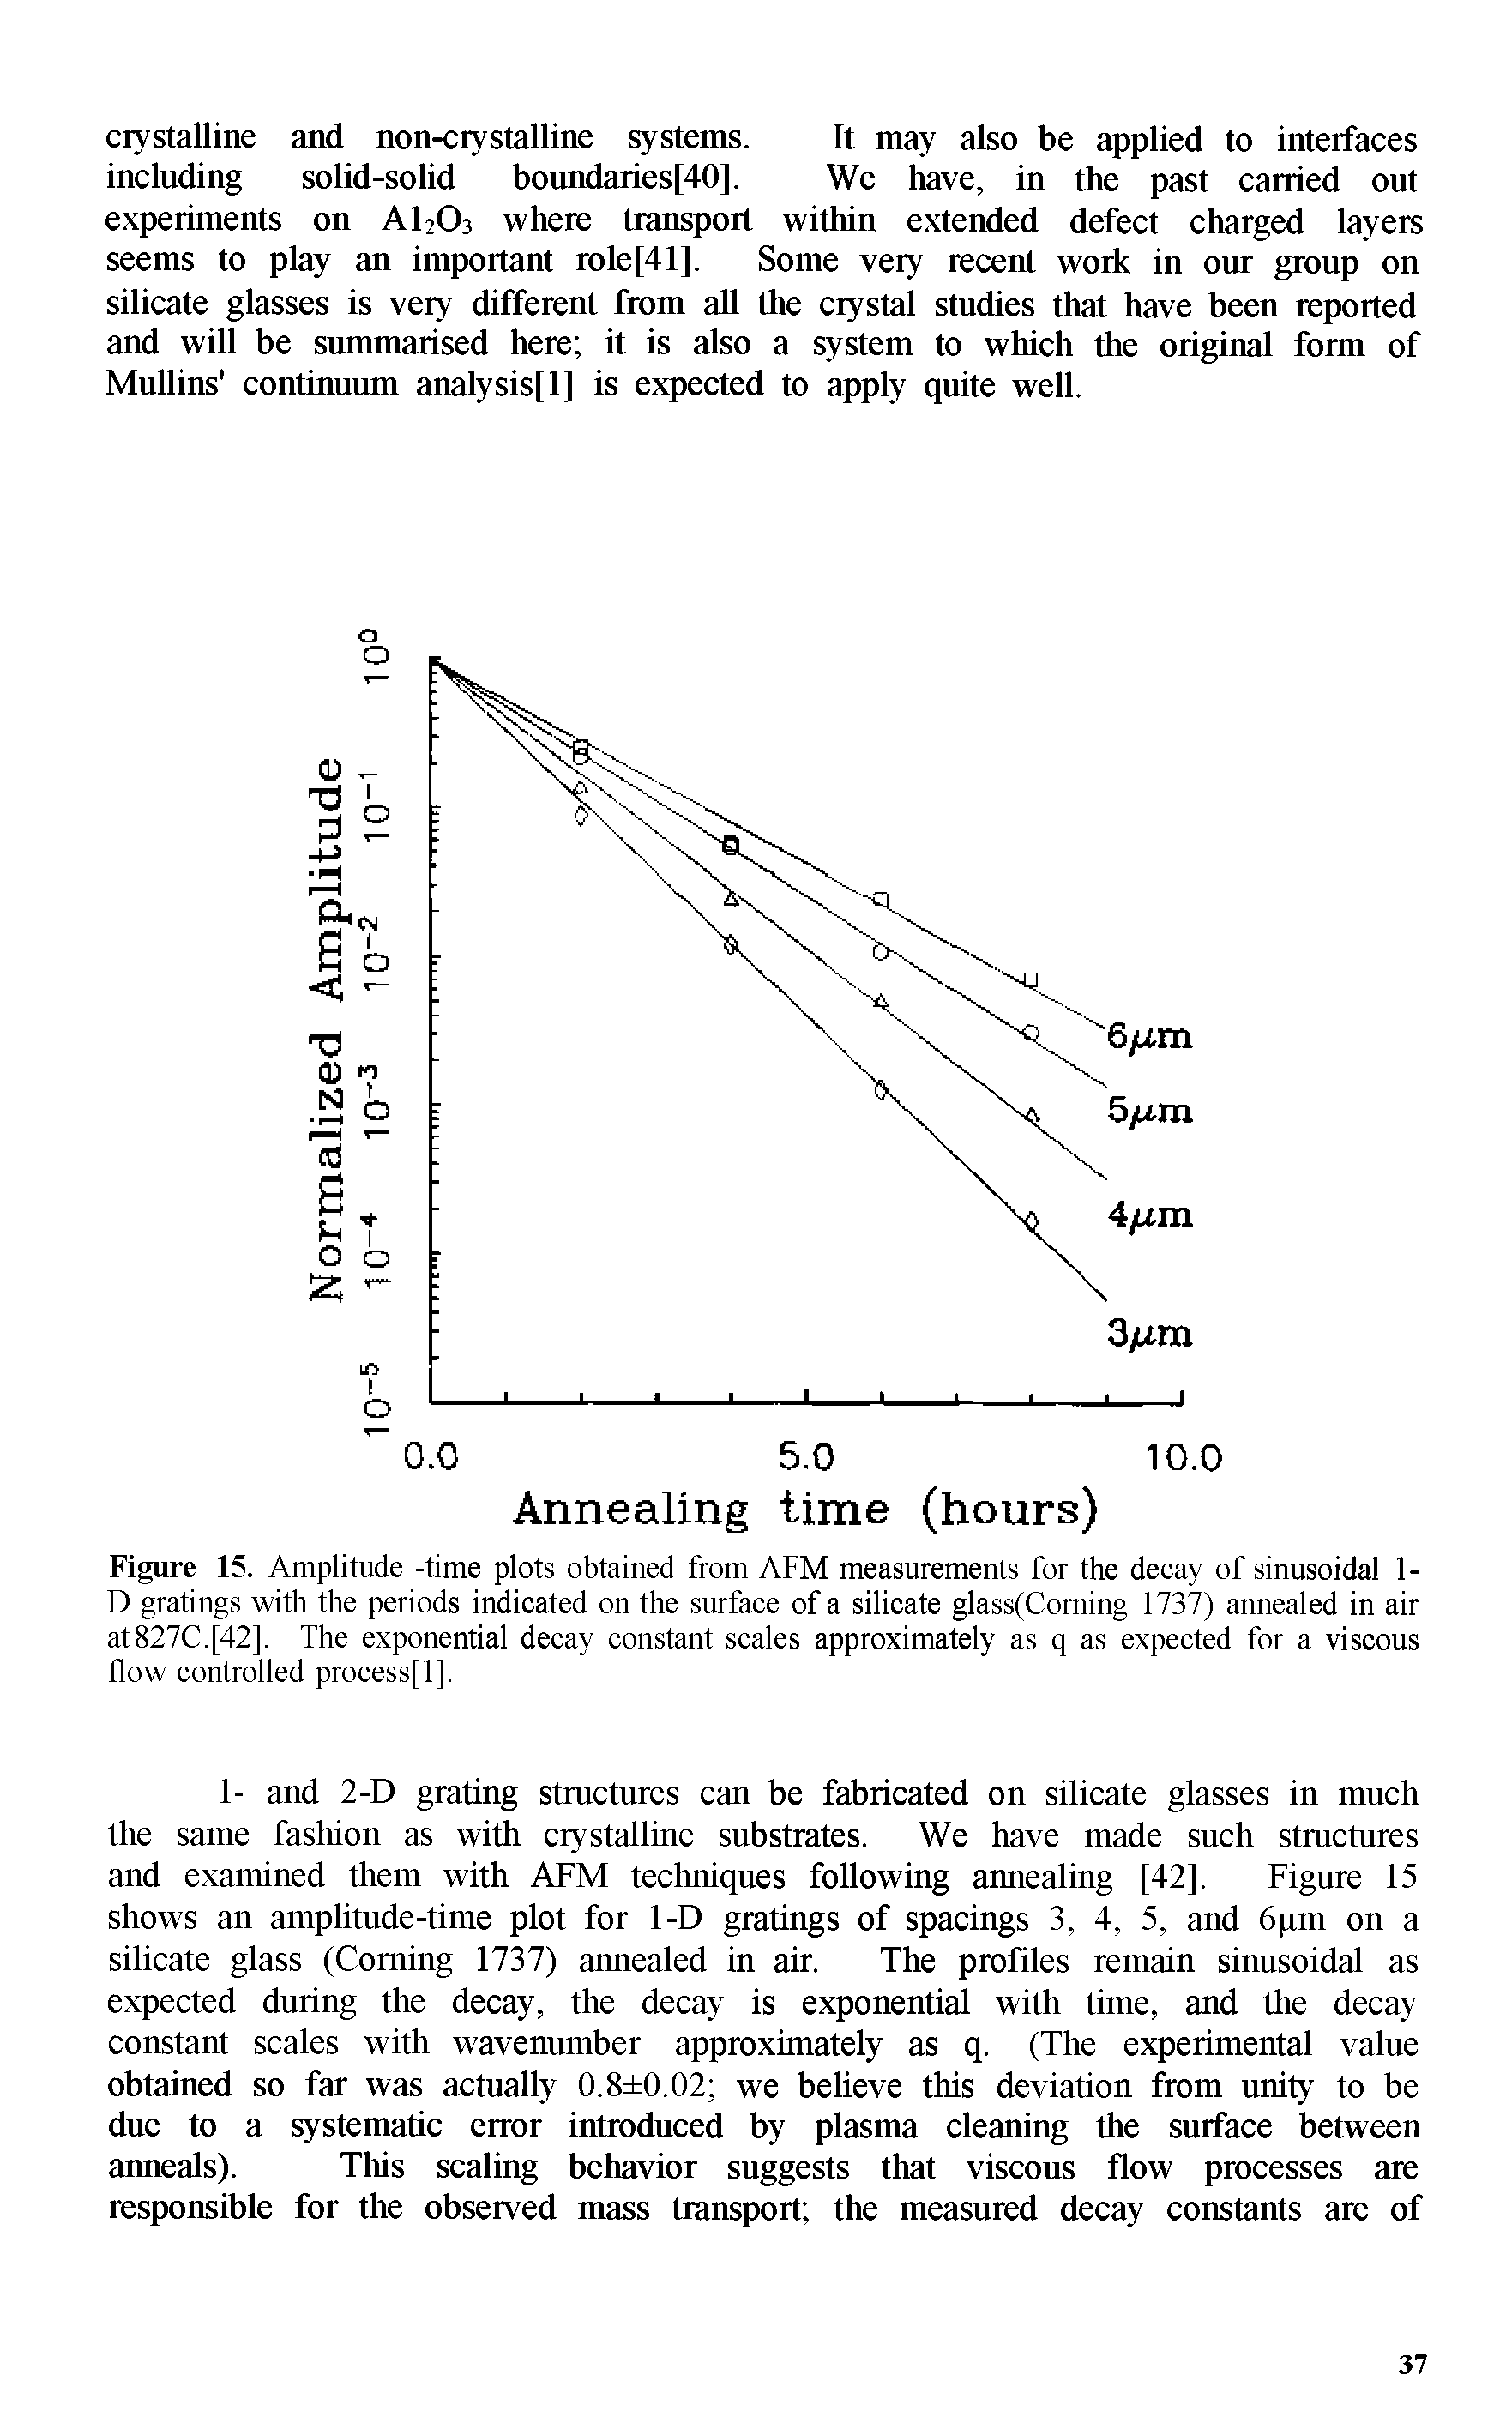 Figure 15. Amplitude -time plots obtained from AFM measurements for the decay of sinusoidal 1-D gratings with the periods indieated on the surface of a silicate glass(Corning 1737) annealed in air at827C.[42], The exponential decay constant scales approximately as q as expected for a viscous flow controlled process[l].